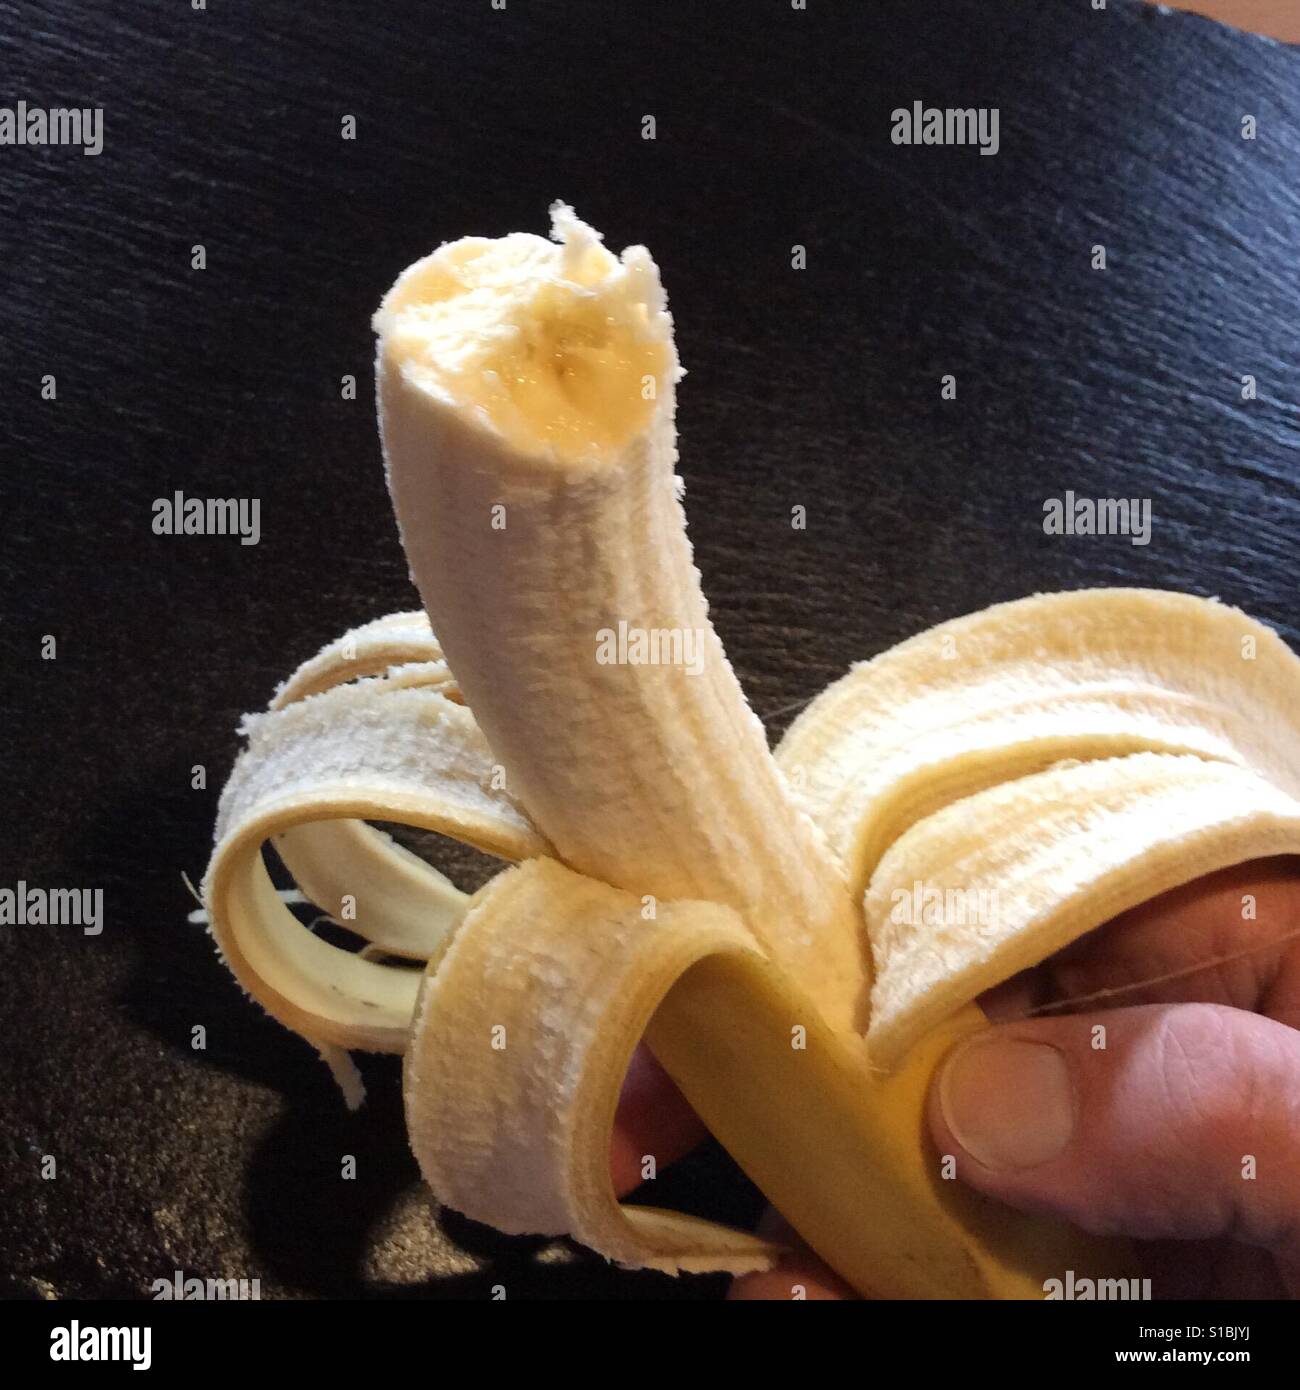 Banana with one bite taken held by female hand Stock Photo